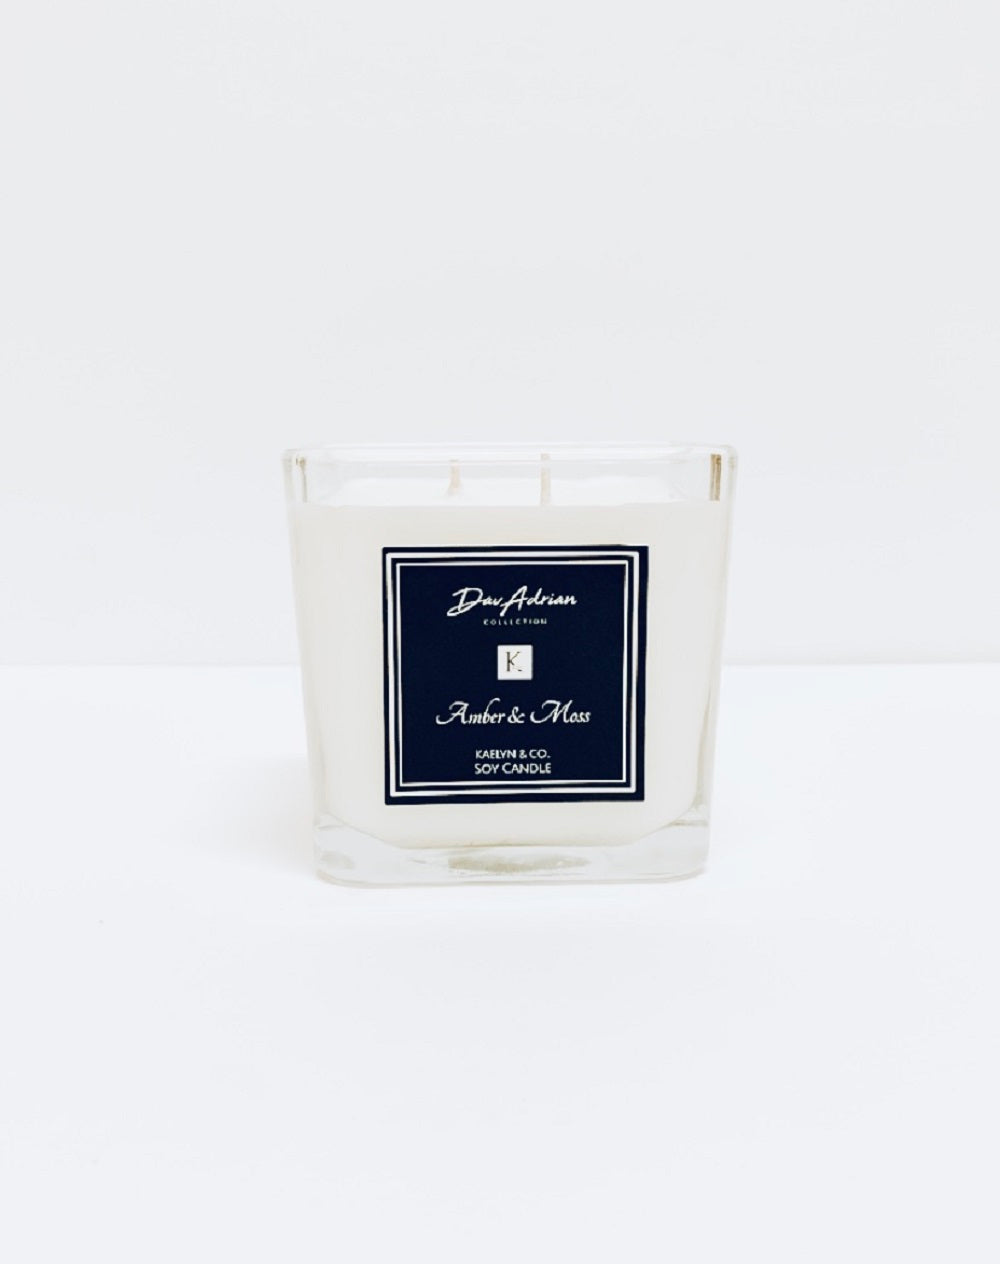 DavAdrian Collection Amber & Moss Medium Cube Candle - Kaelyn & Co.